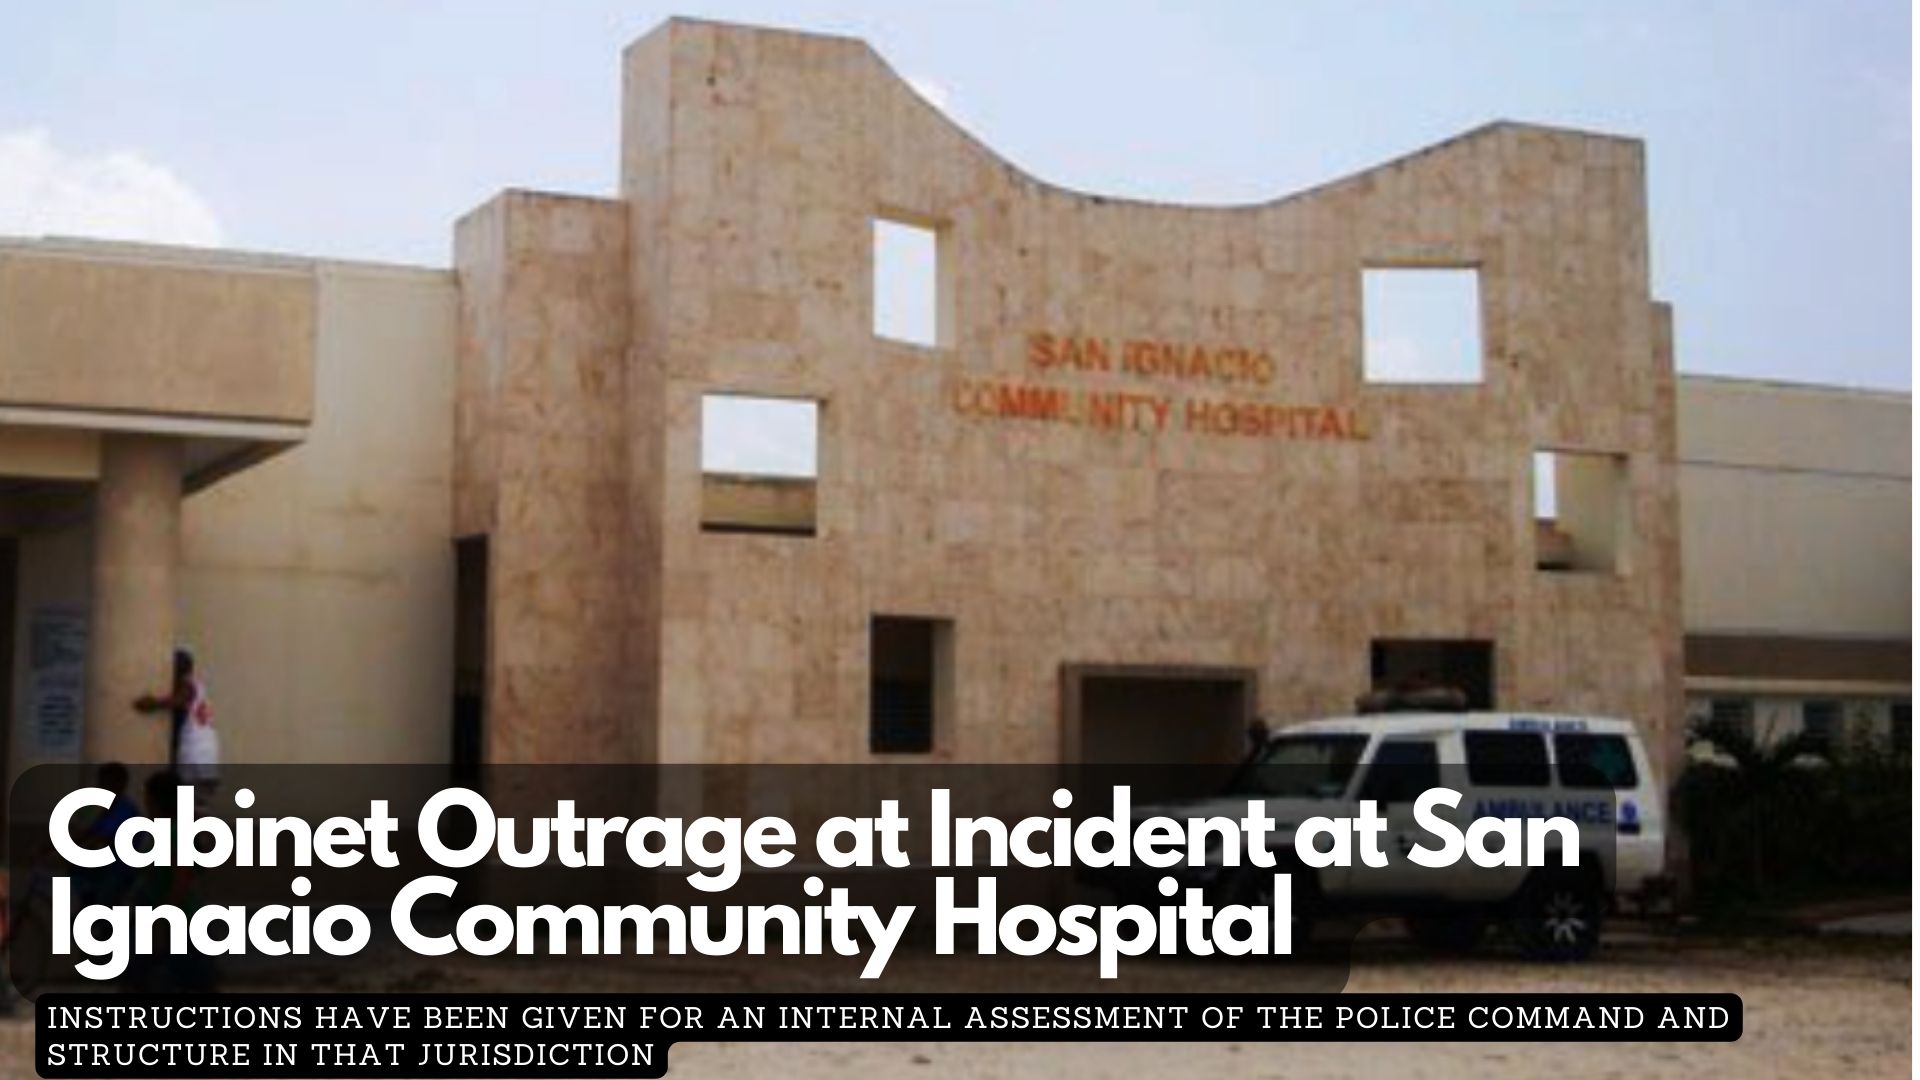 Cabinet Outrage at Incident at San Ignacio Community Hospital